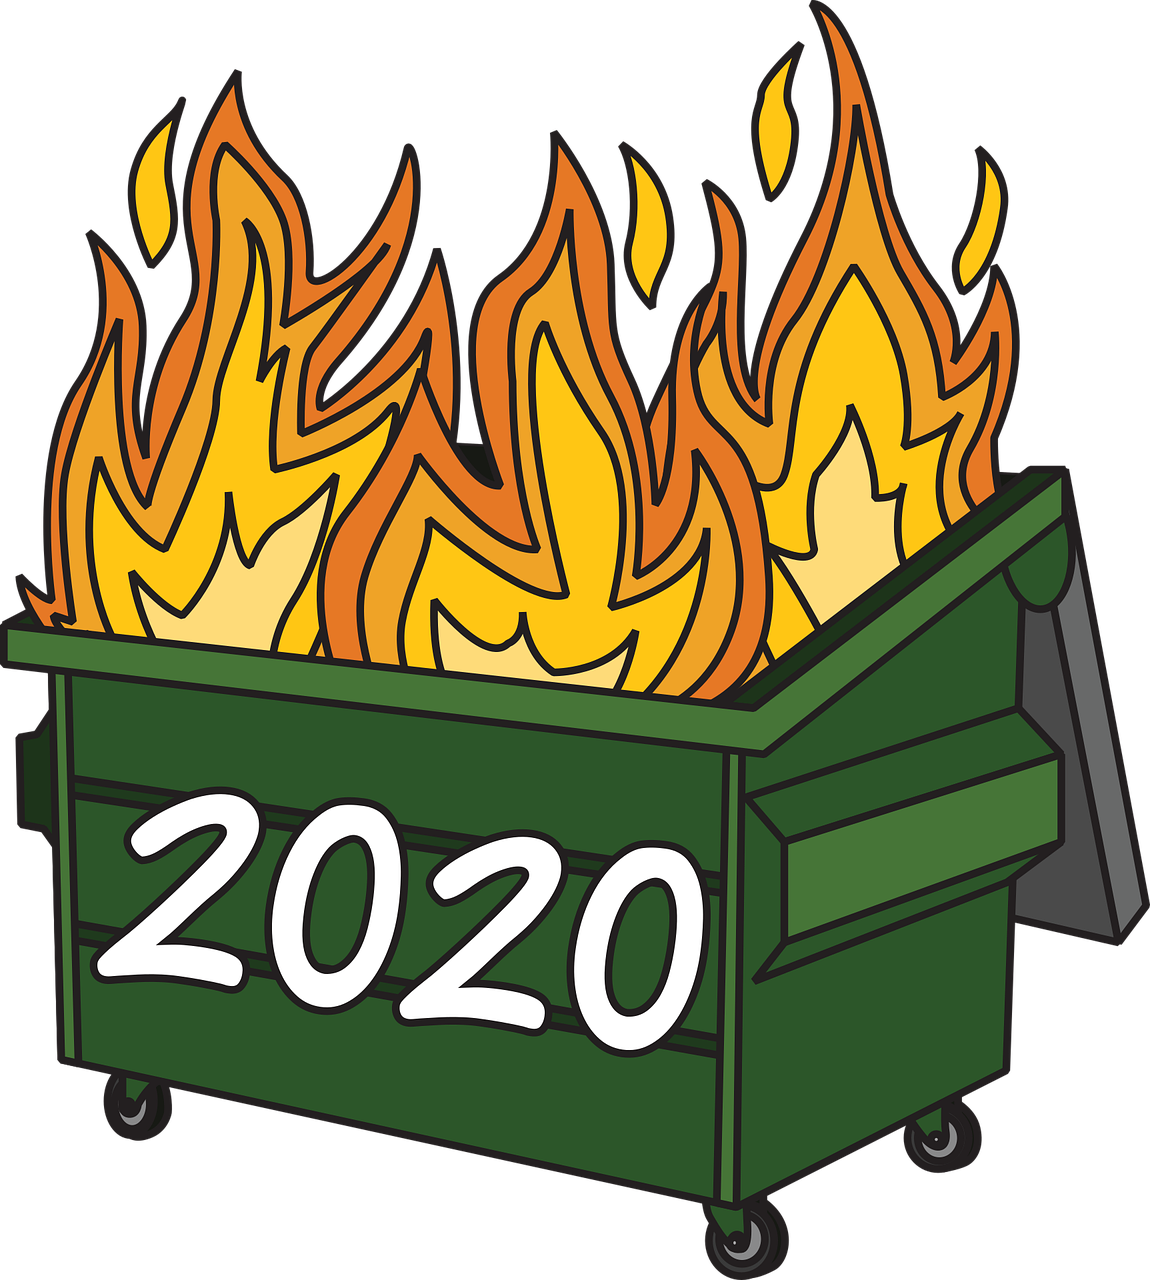 Dumpster on fire with 2020 on the outside